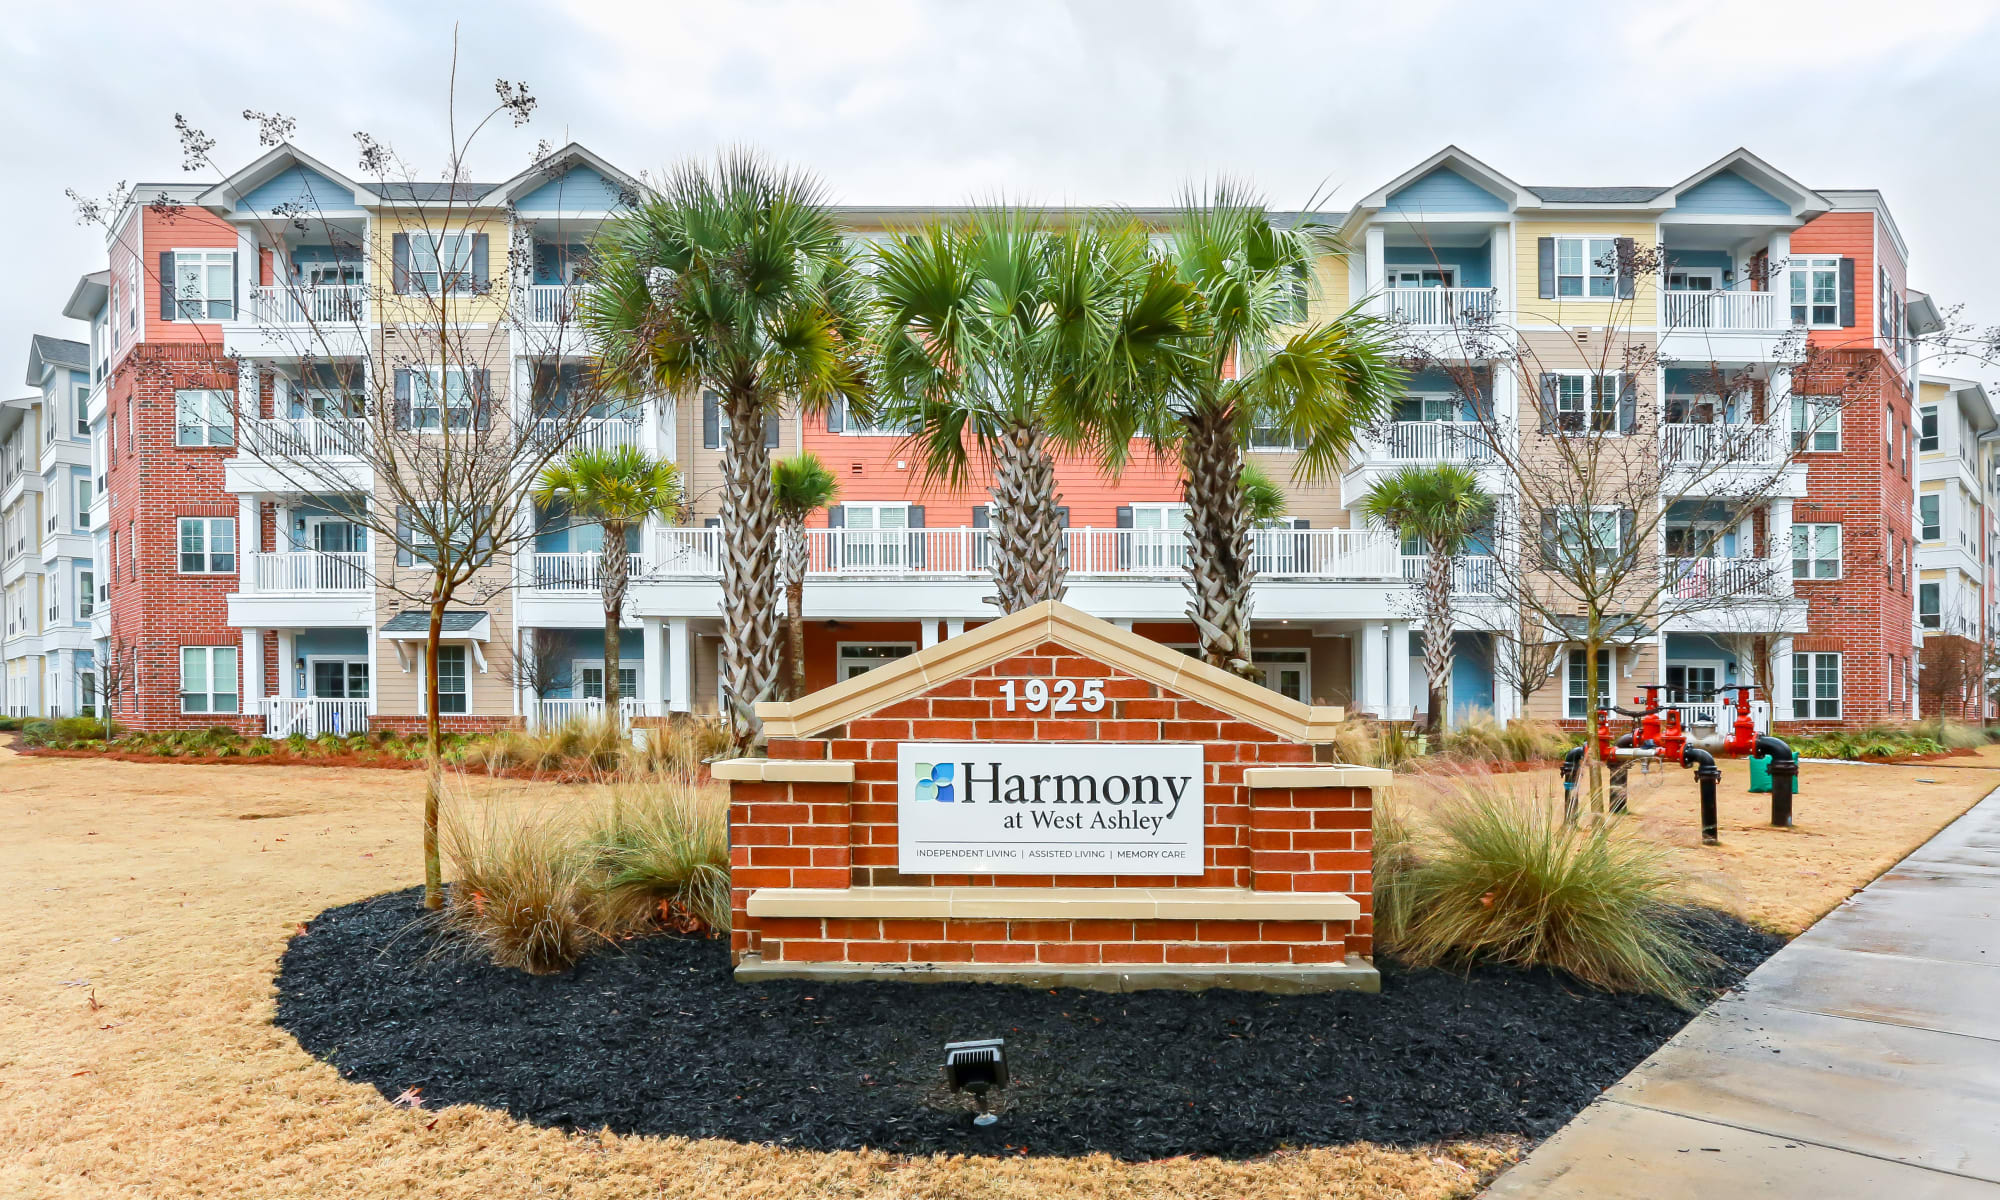 Adult Care Homes in Charleston, SC